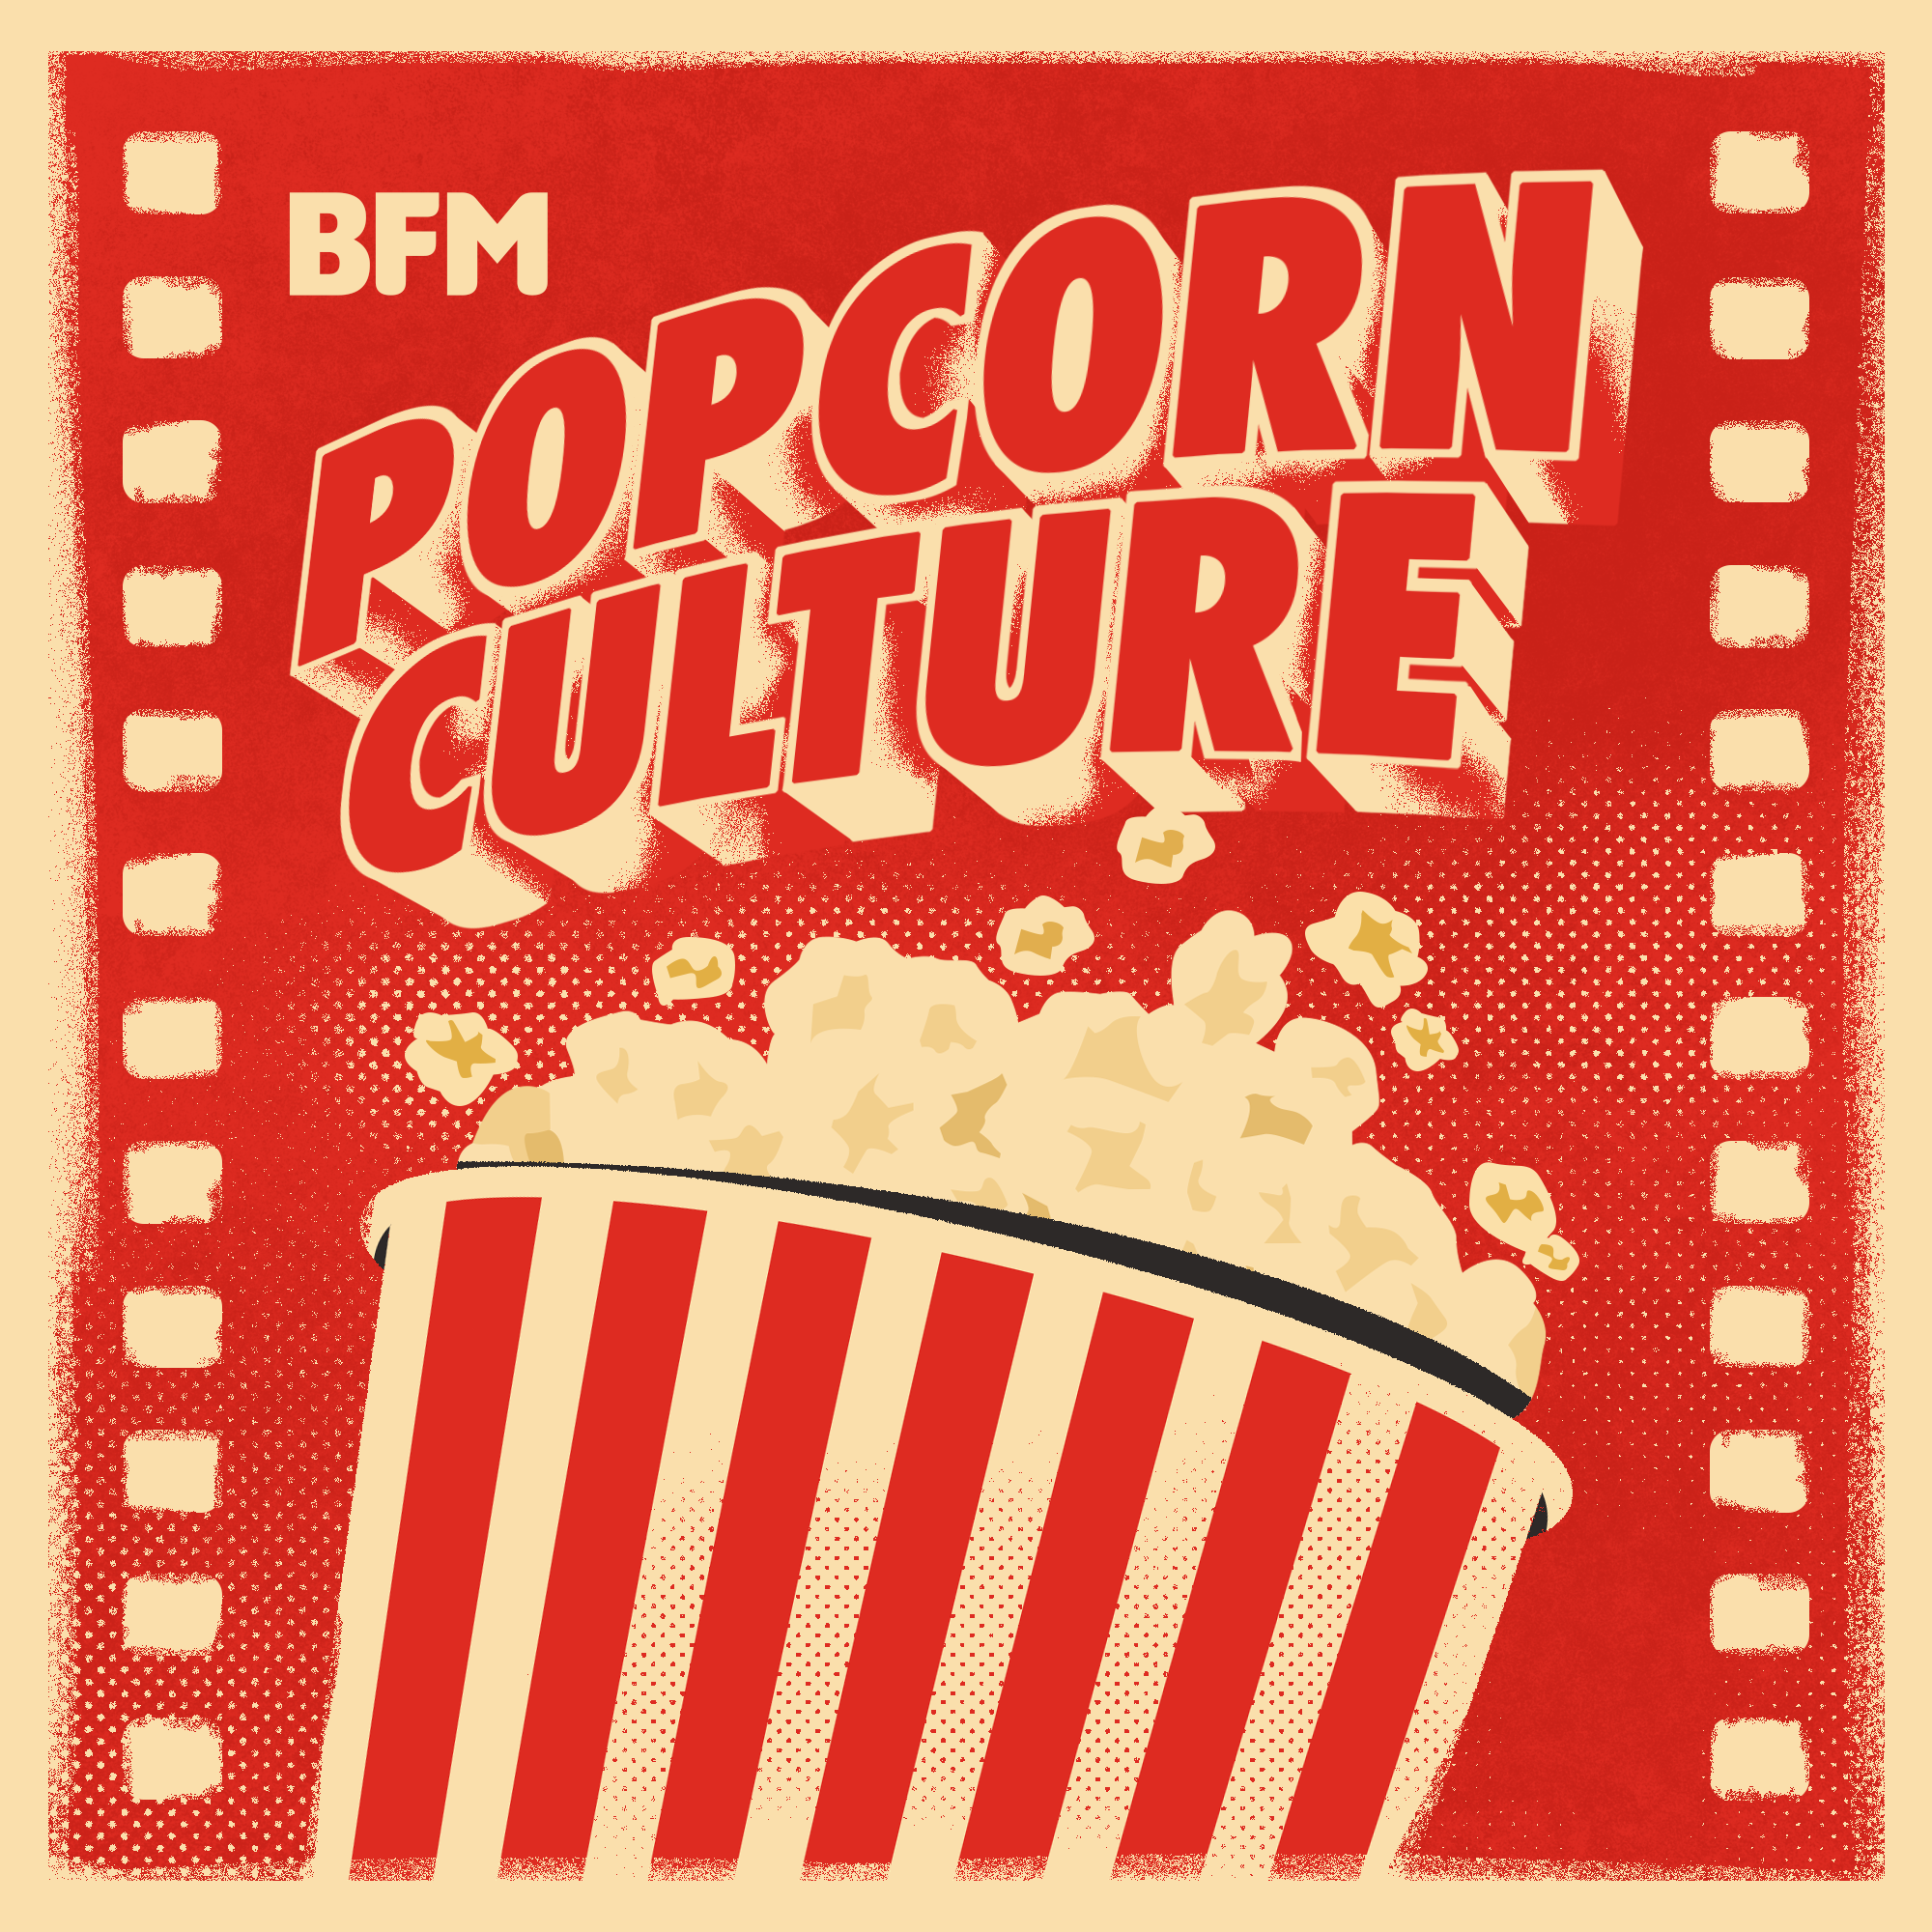 Popcorn Culture - Supercut: They Came from Outer Space